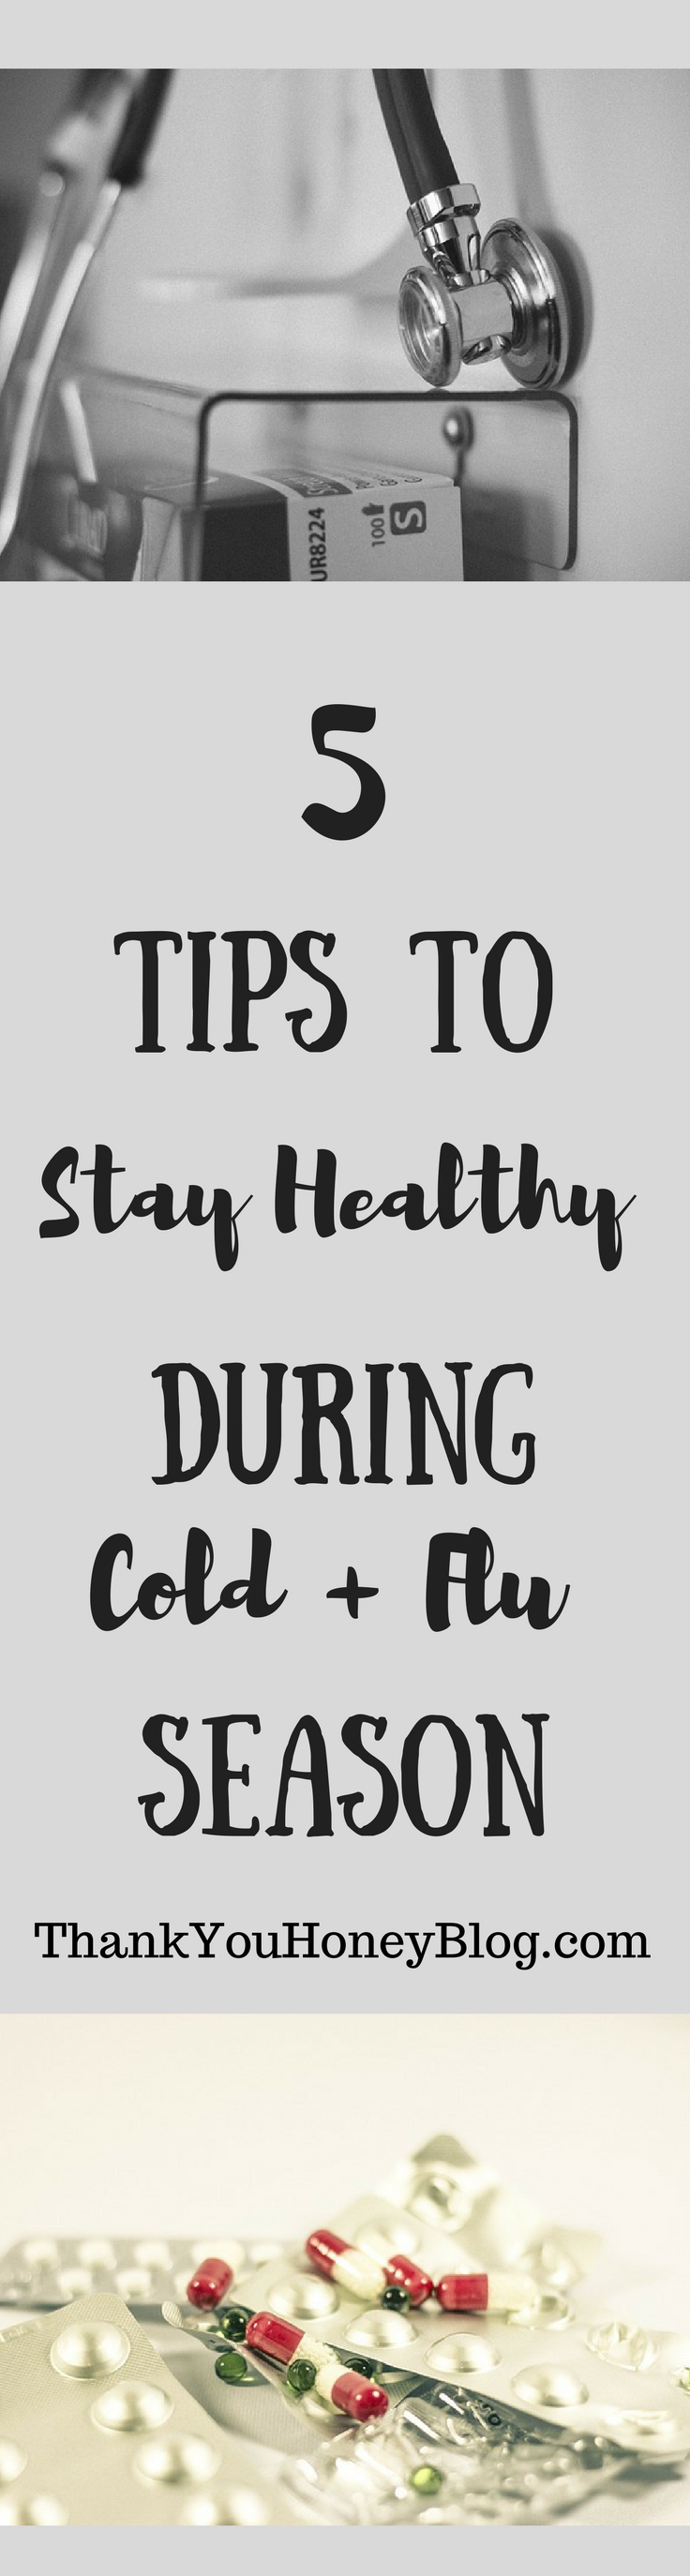 5 Tips to Stay Healthy During Cold + Flu Season